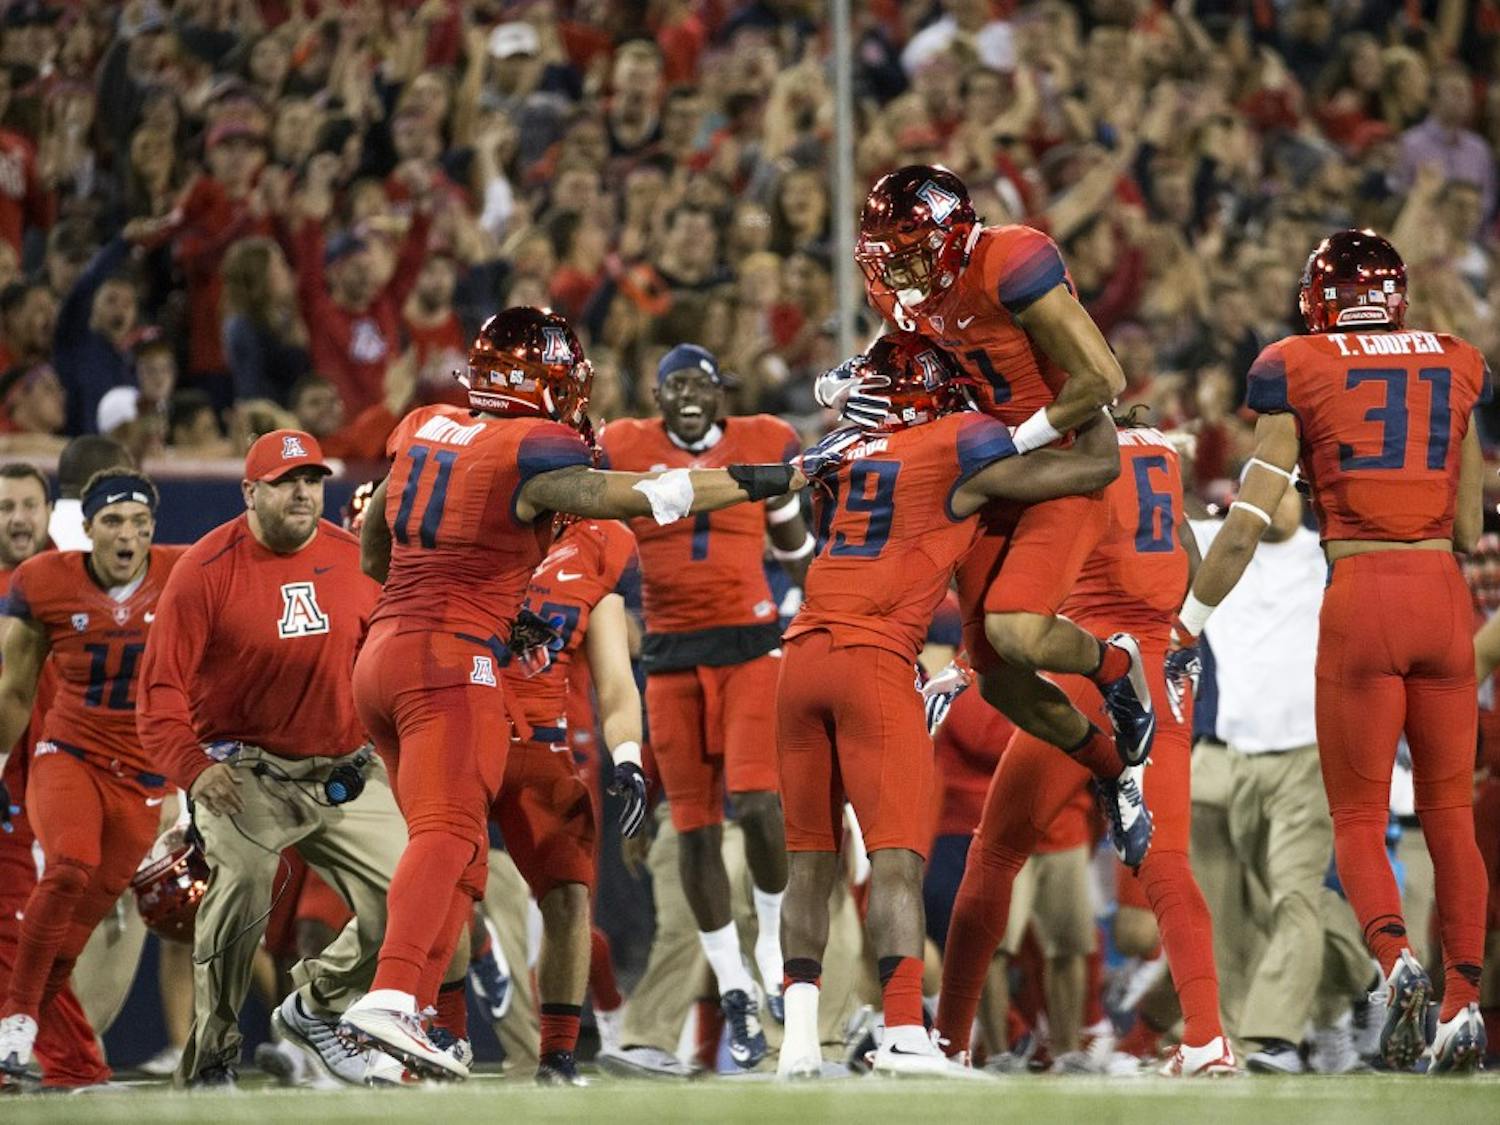 The UA football reacts after an interception in the first quarter of the annual Territorial Cup football game against UA in Tucson's Arizona Stadium on Friday, Nov. 25, 2016.